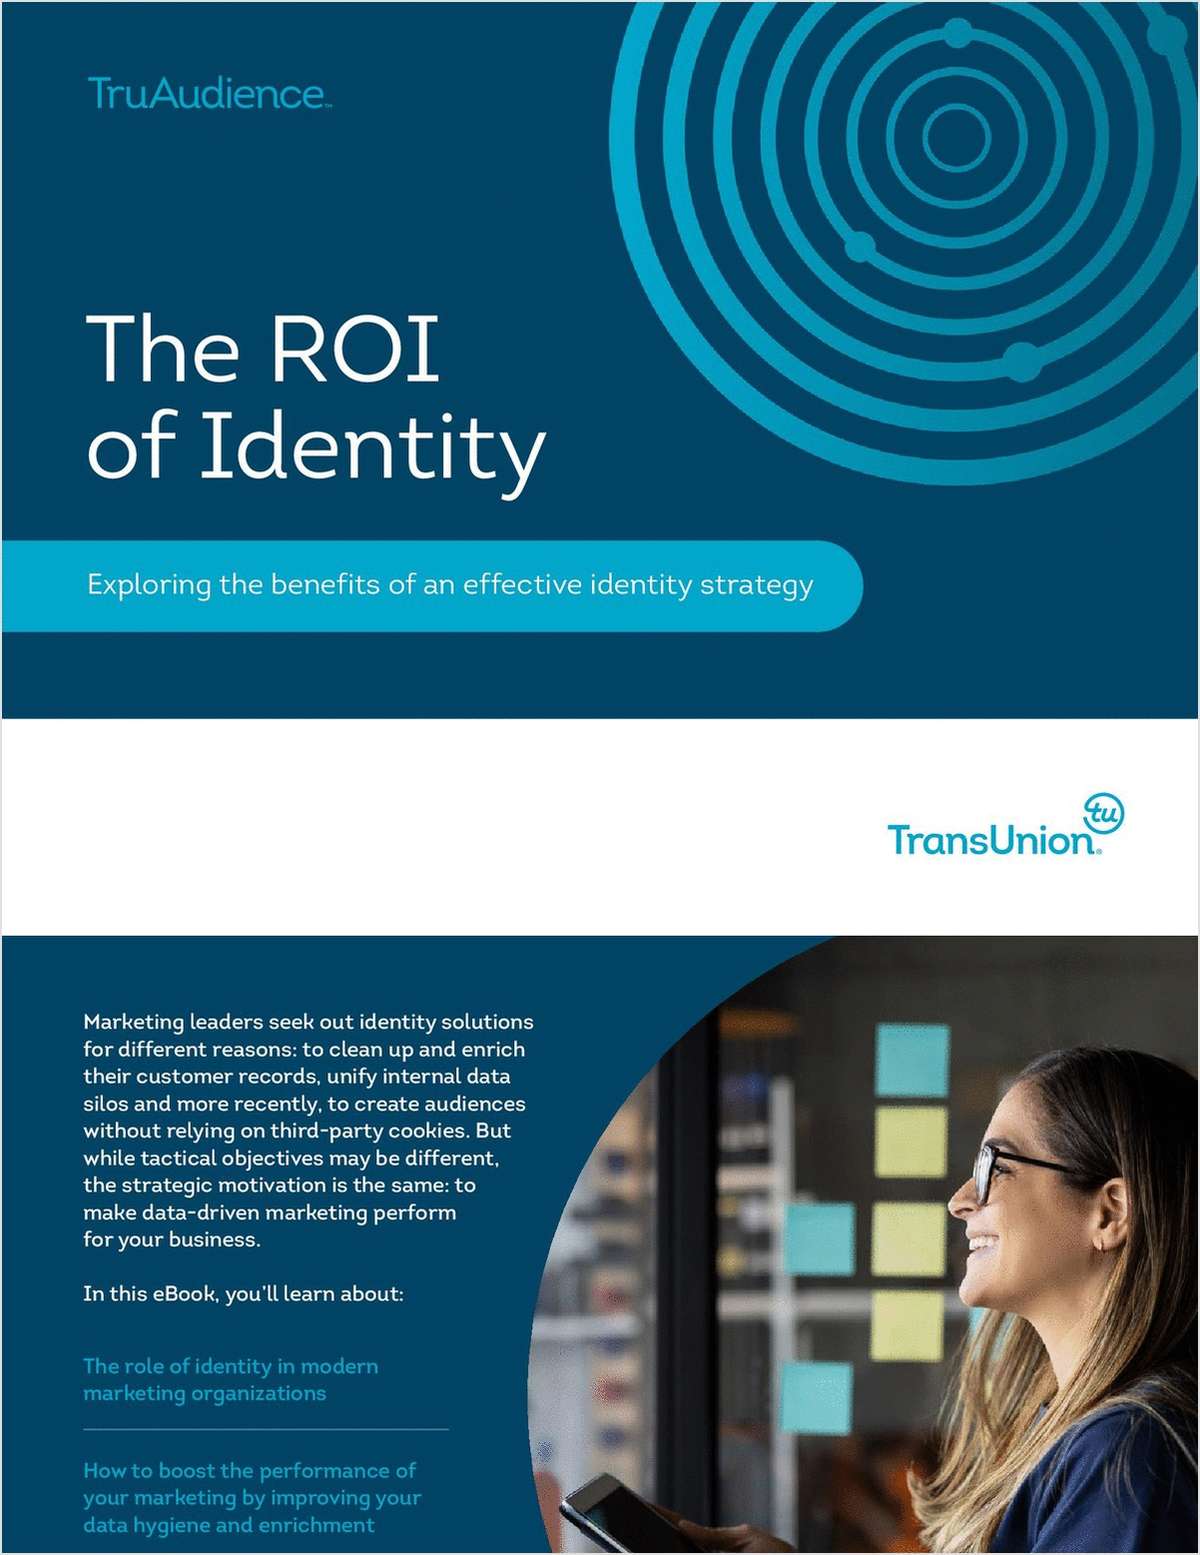 The ROI of Identity: Exploring the Benefits of an Effective Identity Strategy